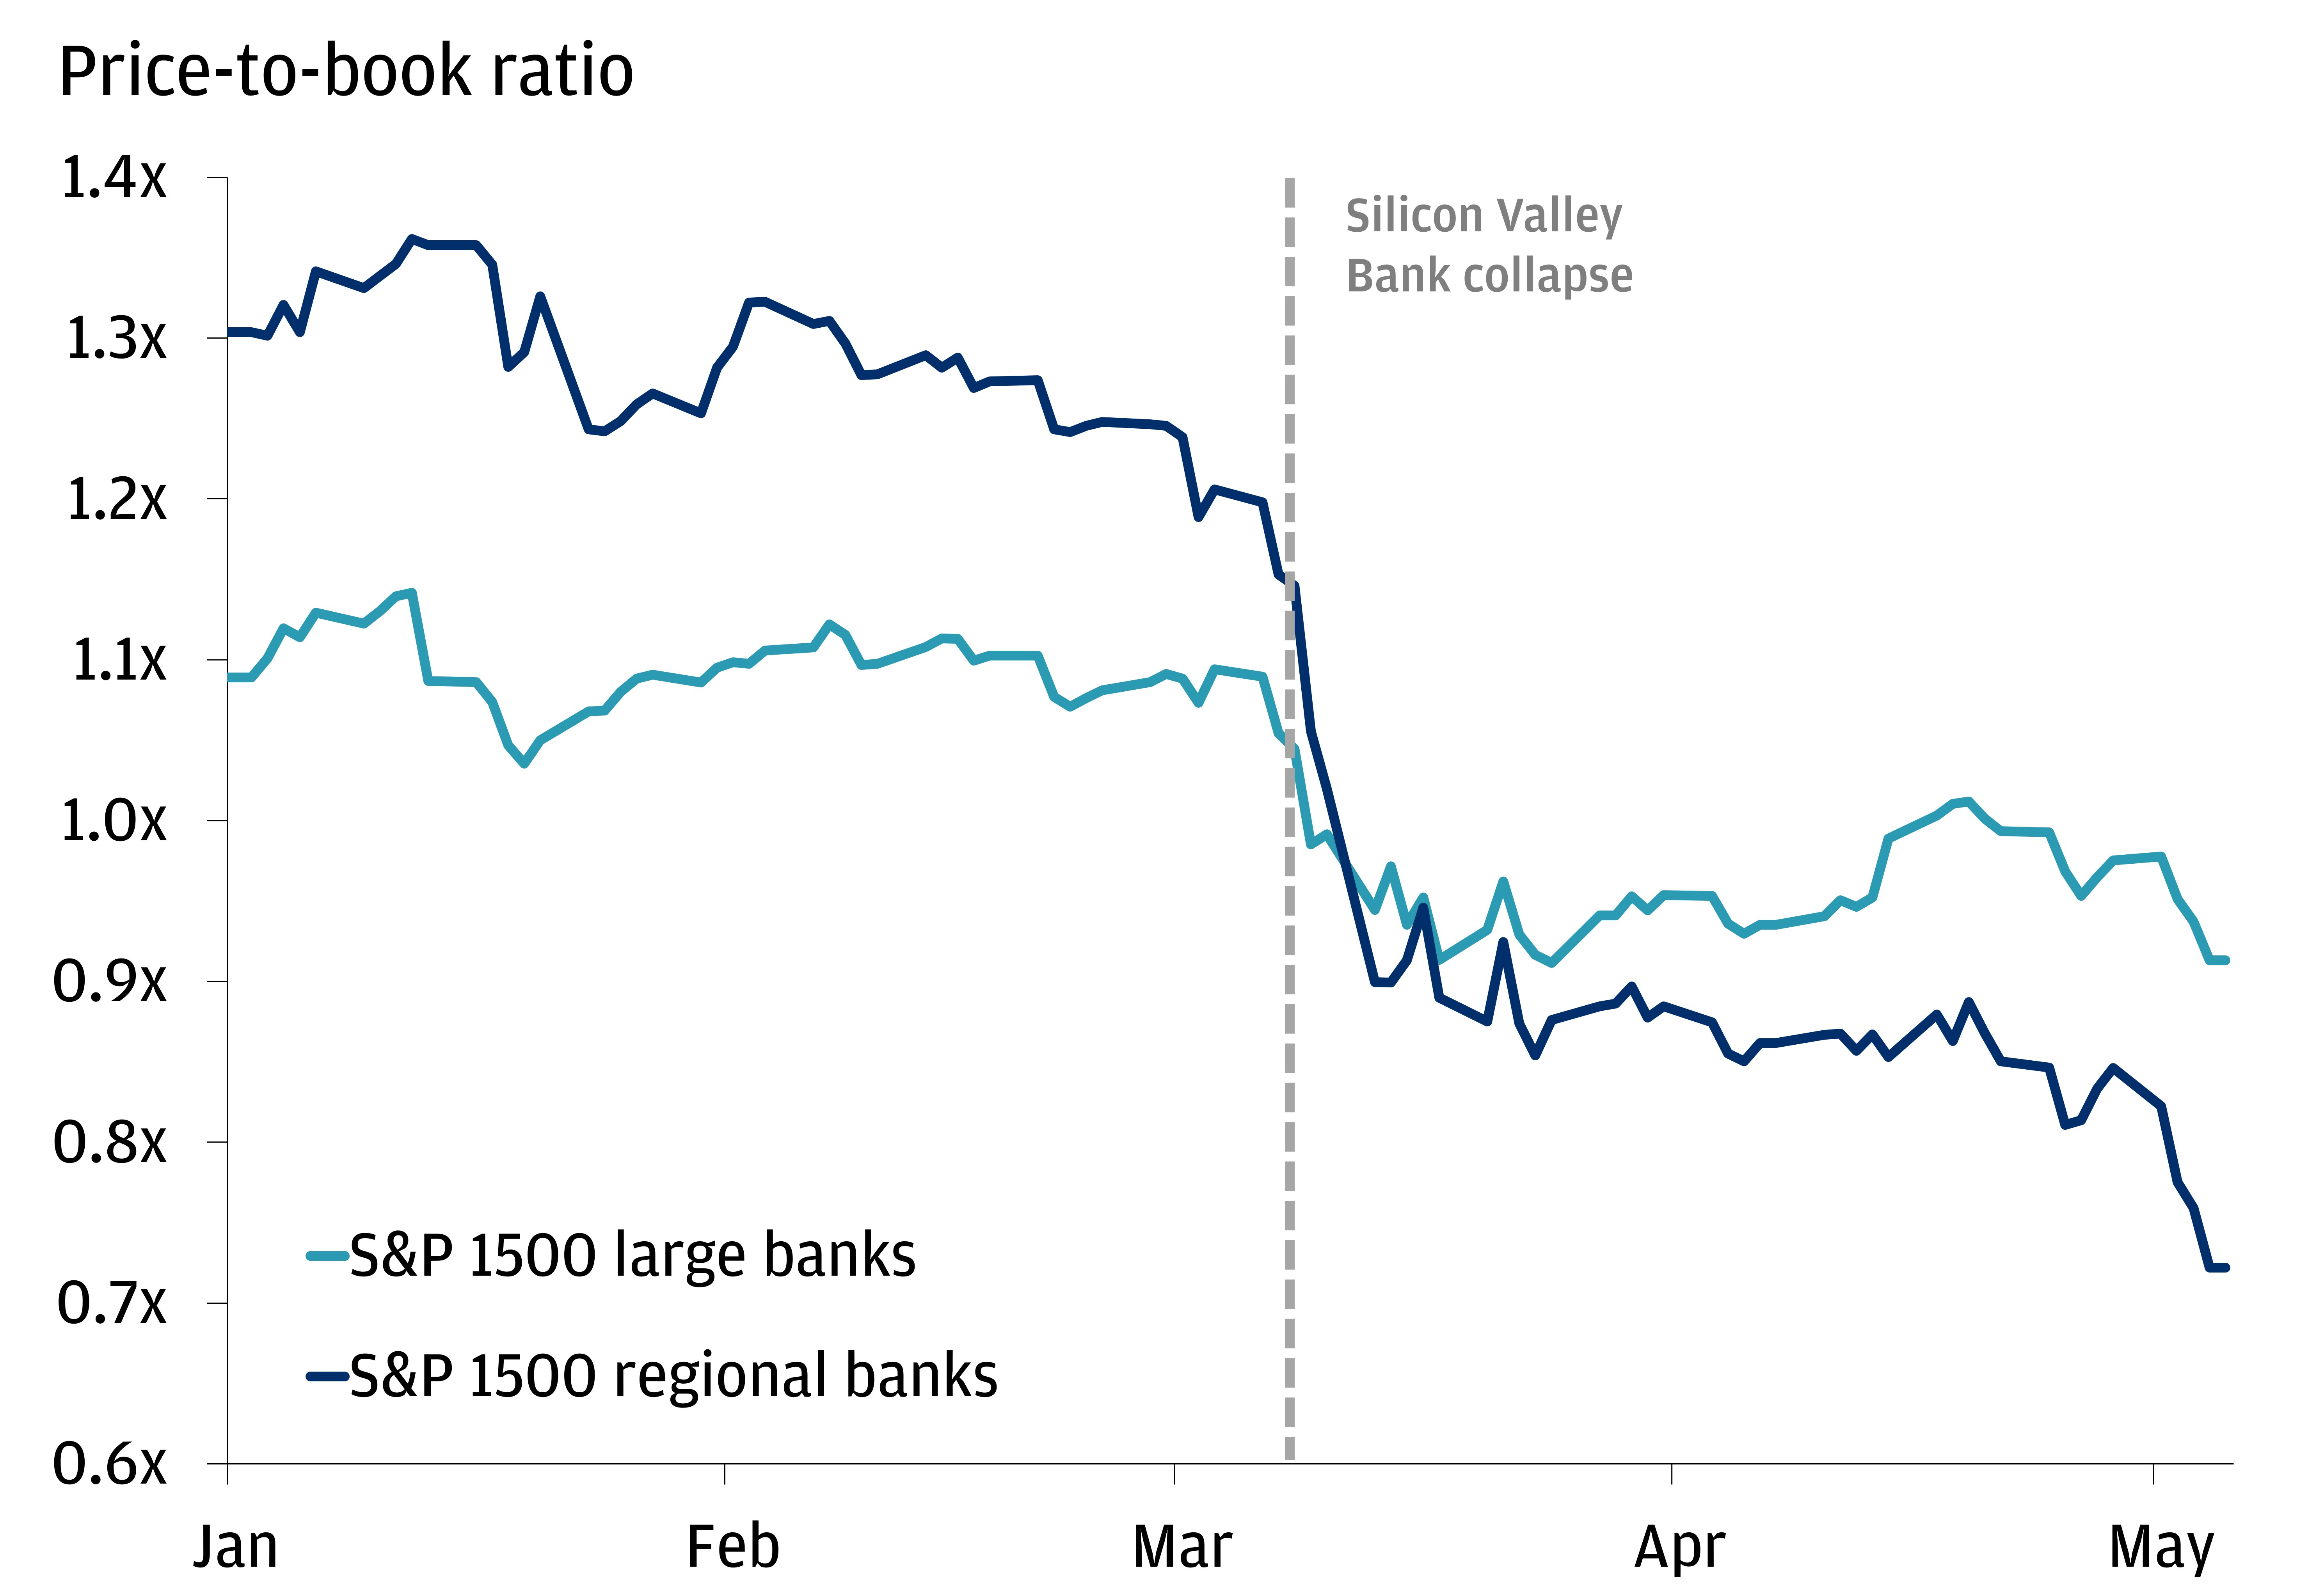 This chart shows the price-to-book ratio of the S&P 1500 Large Banks Index and S&P 1500 Regional Banks from January 2023 to May 2023. 